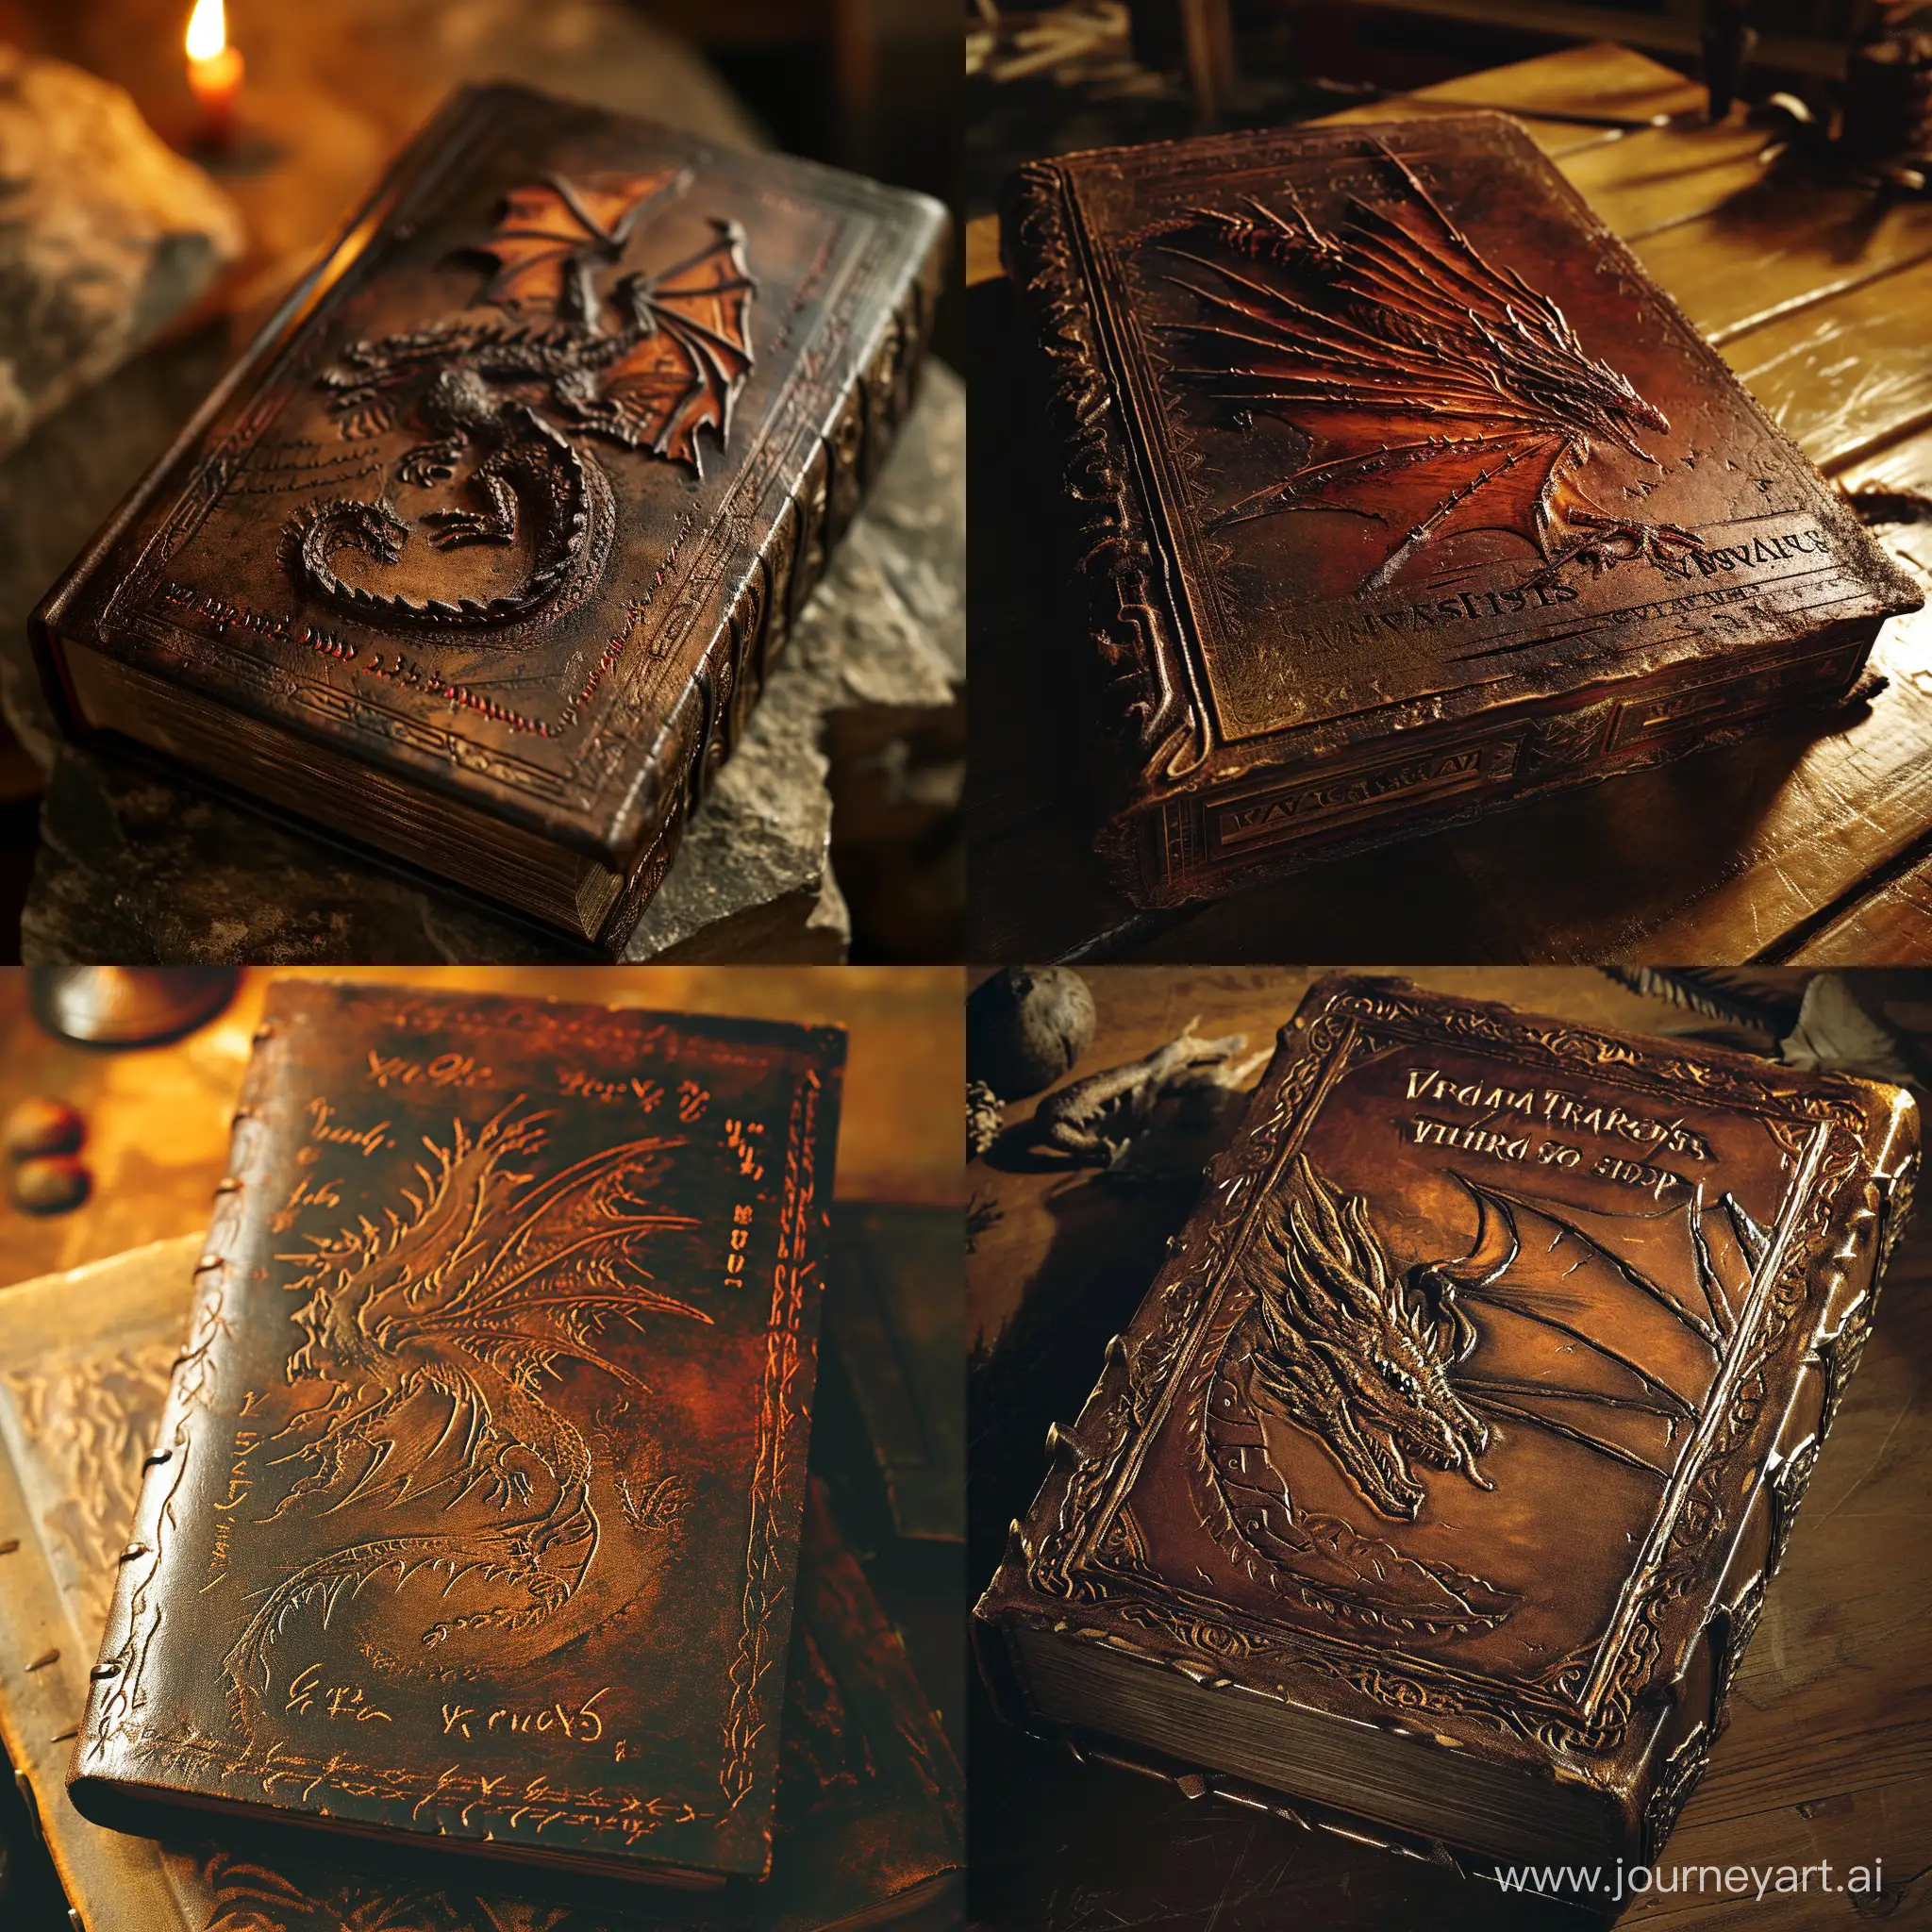 Dragonology tome,a dragon on it, ancient,leather cover,runic script,incredible detail,warm light,terrifying.